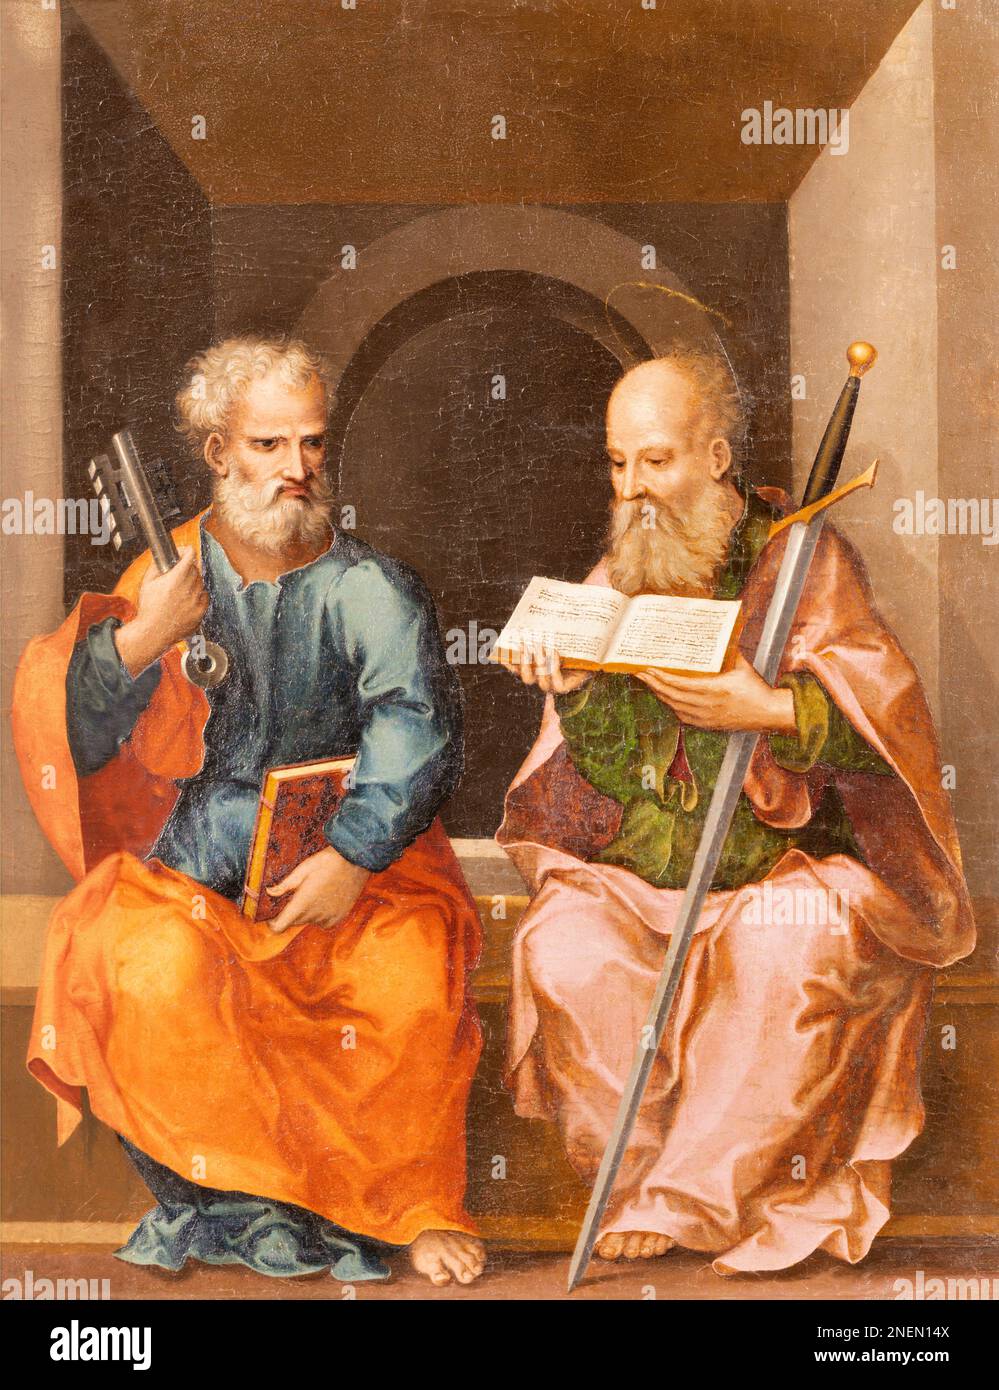 VALENCIA, SPAIN - FEBRUARY 14, 2022: The painting of  Apostles St. Peter and Paul in the church Iglesia San Juan del Hospital Stock Photo